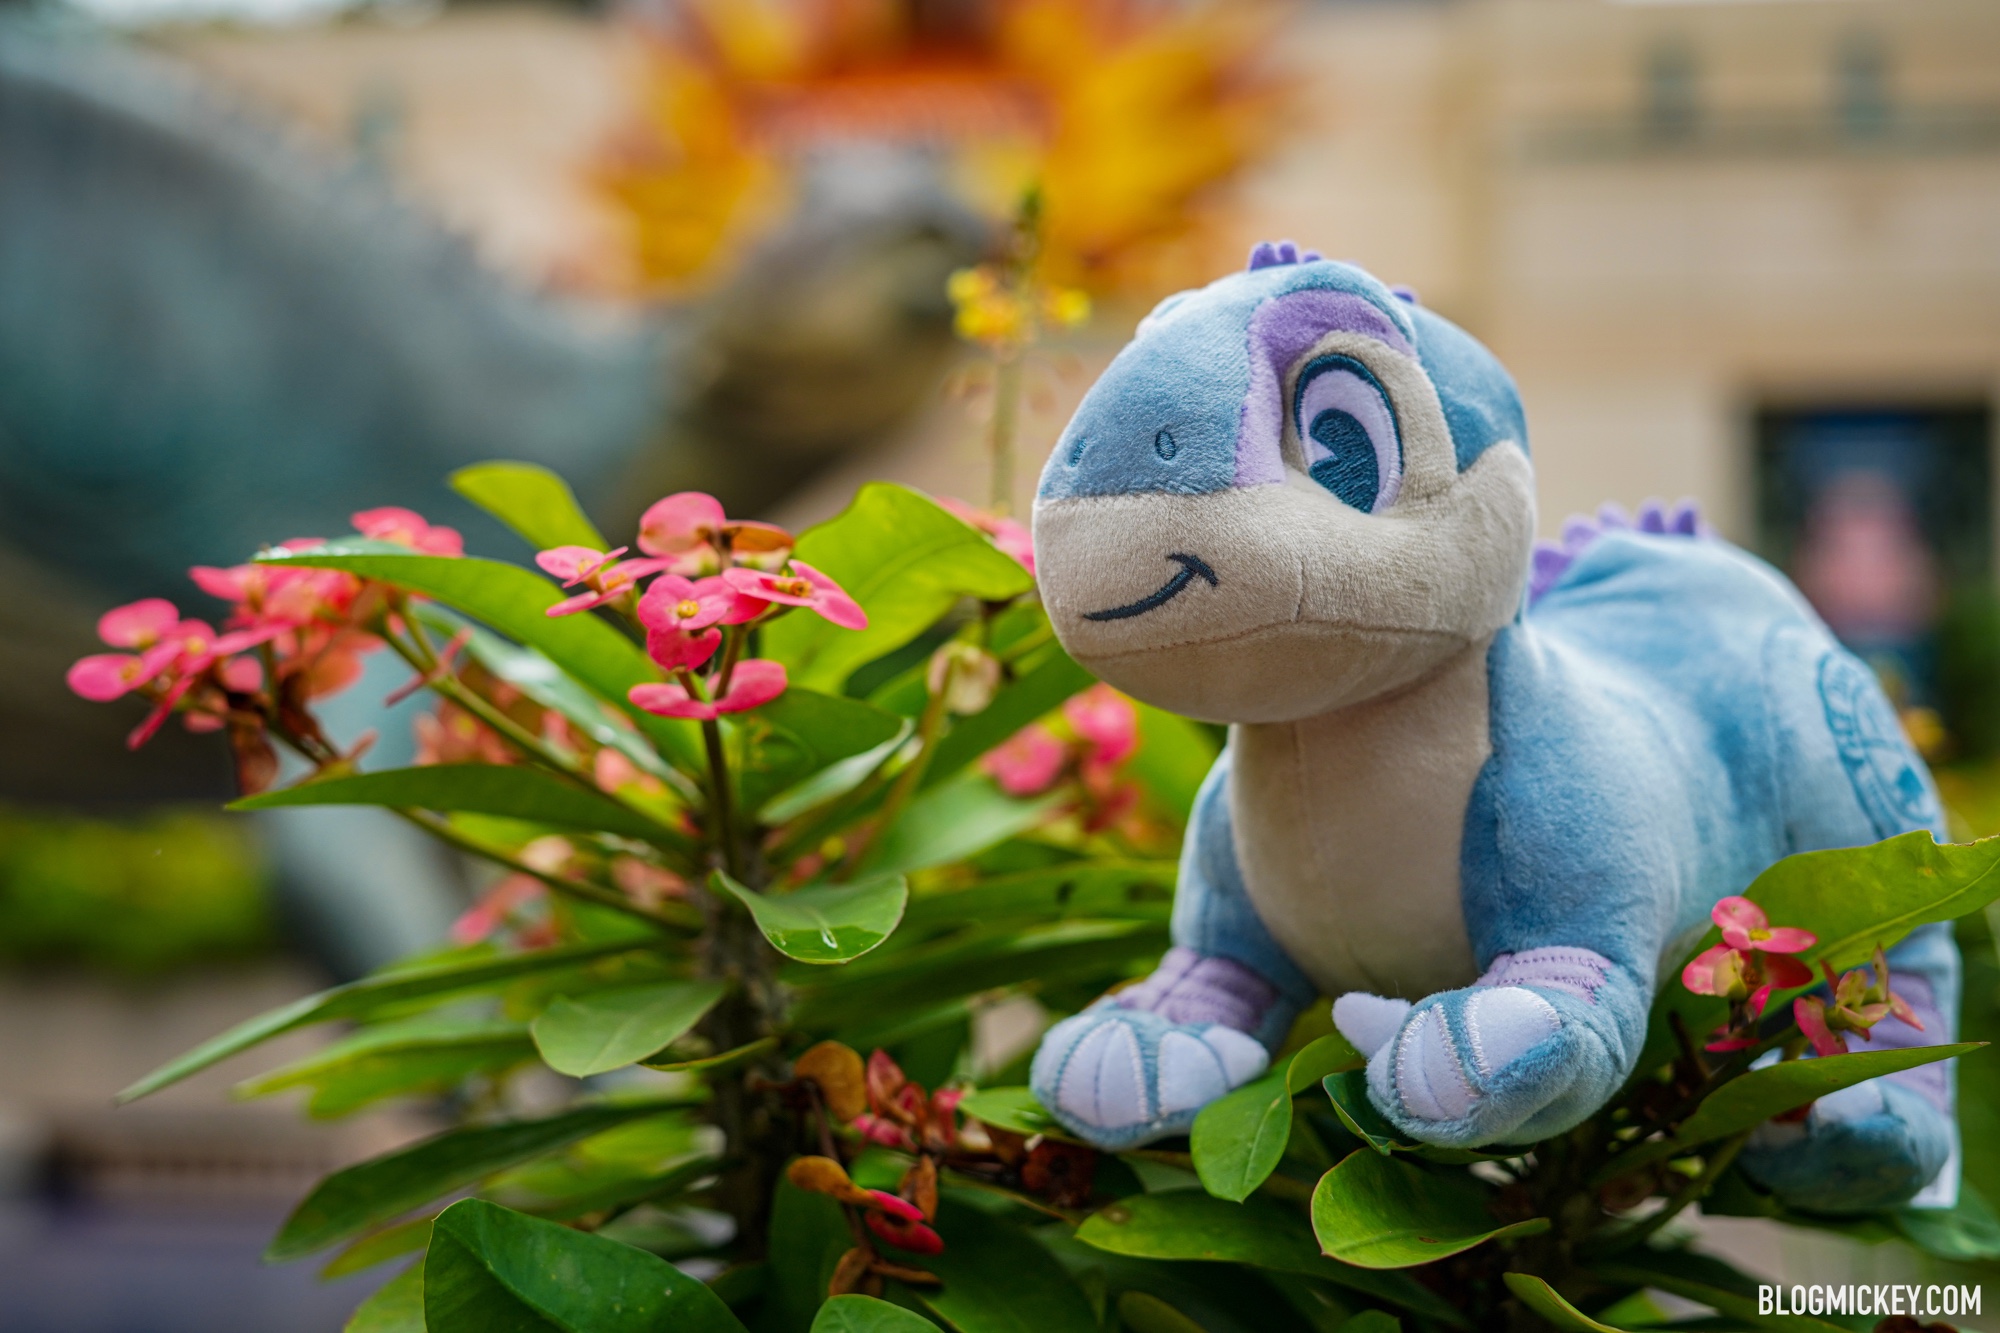 Passholders Receive Complimentary Retired Game Plush With New DinoLand  Offer at Animal Kingdom